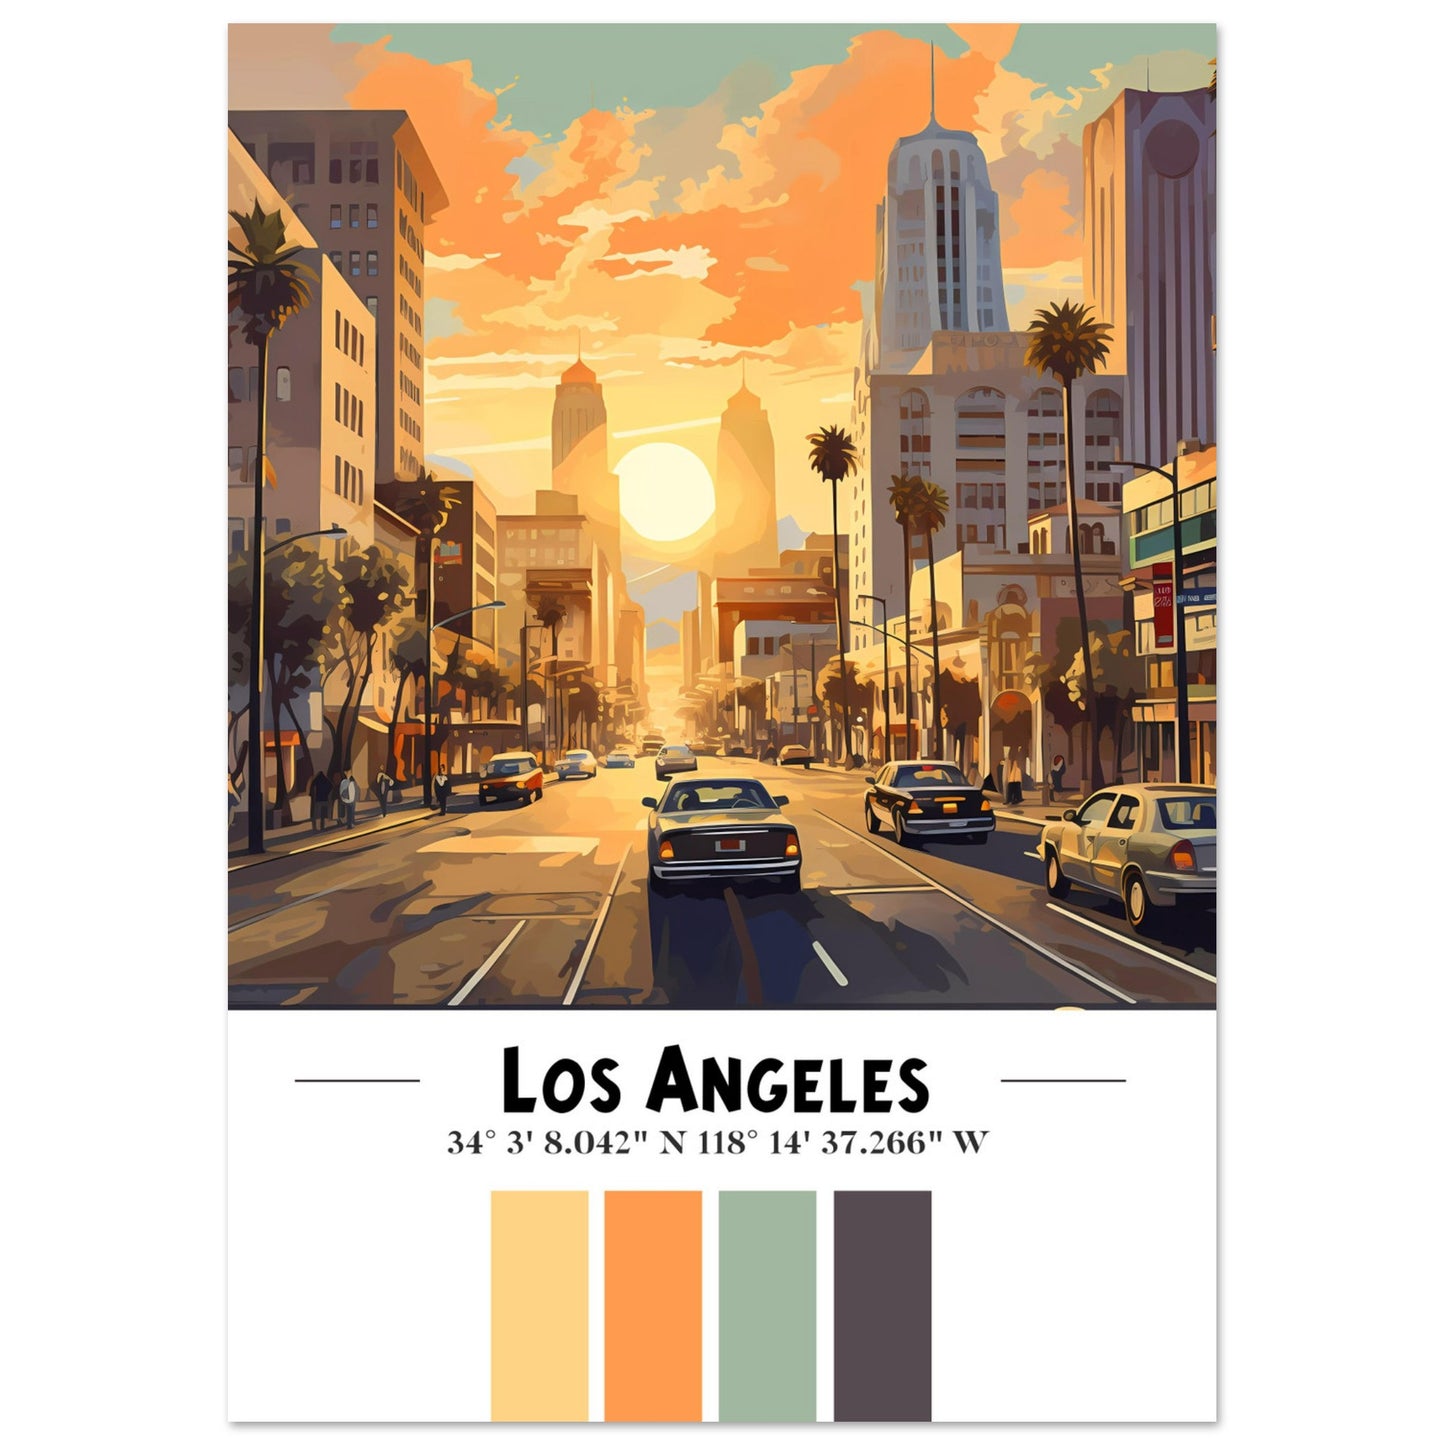 LOS ANGELES POSTER